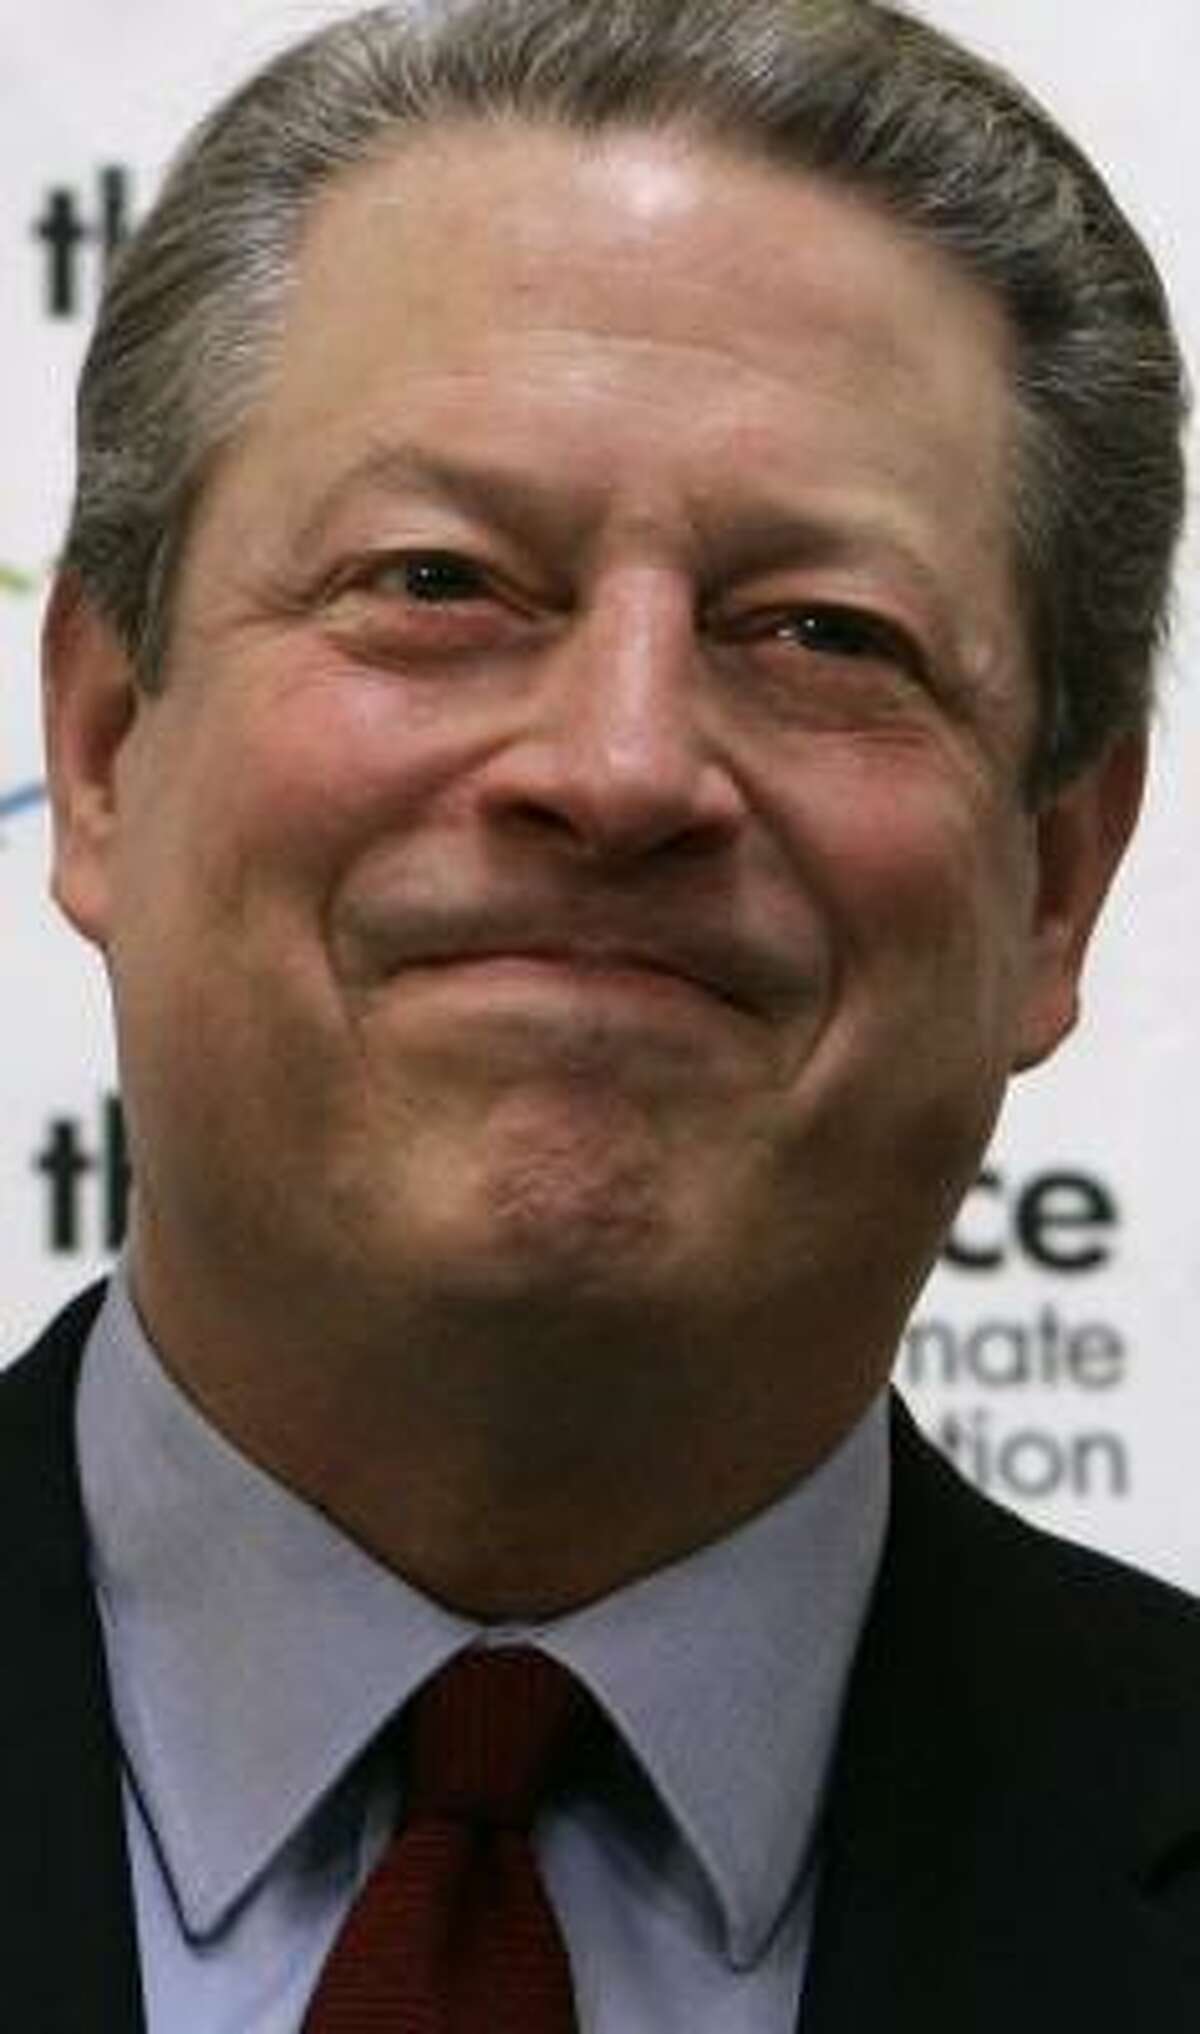 Former Vice President Al Gore said climate change is a "moral and spiritual challenge to all of humanity."